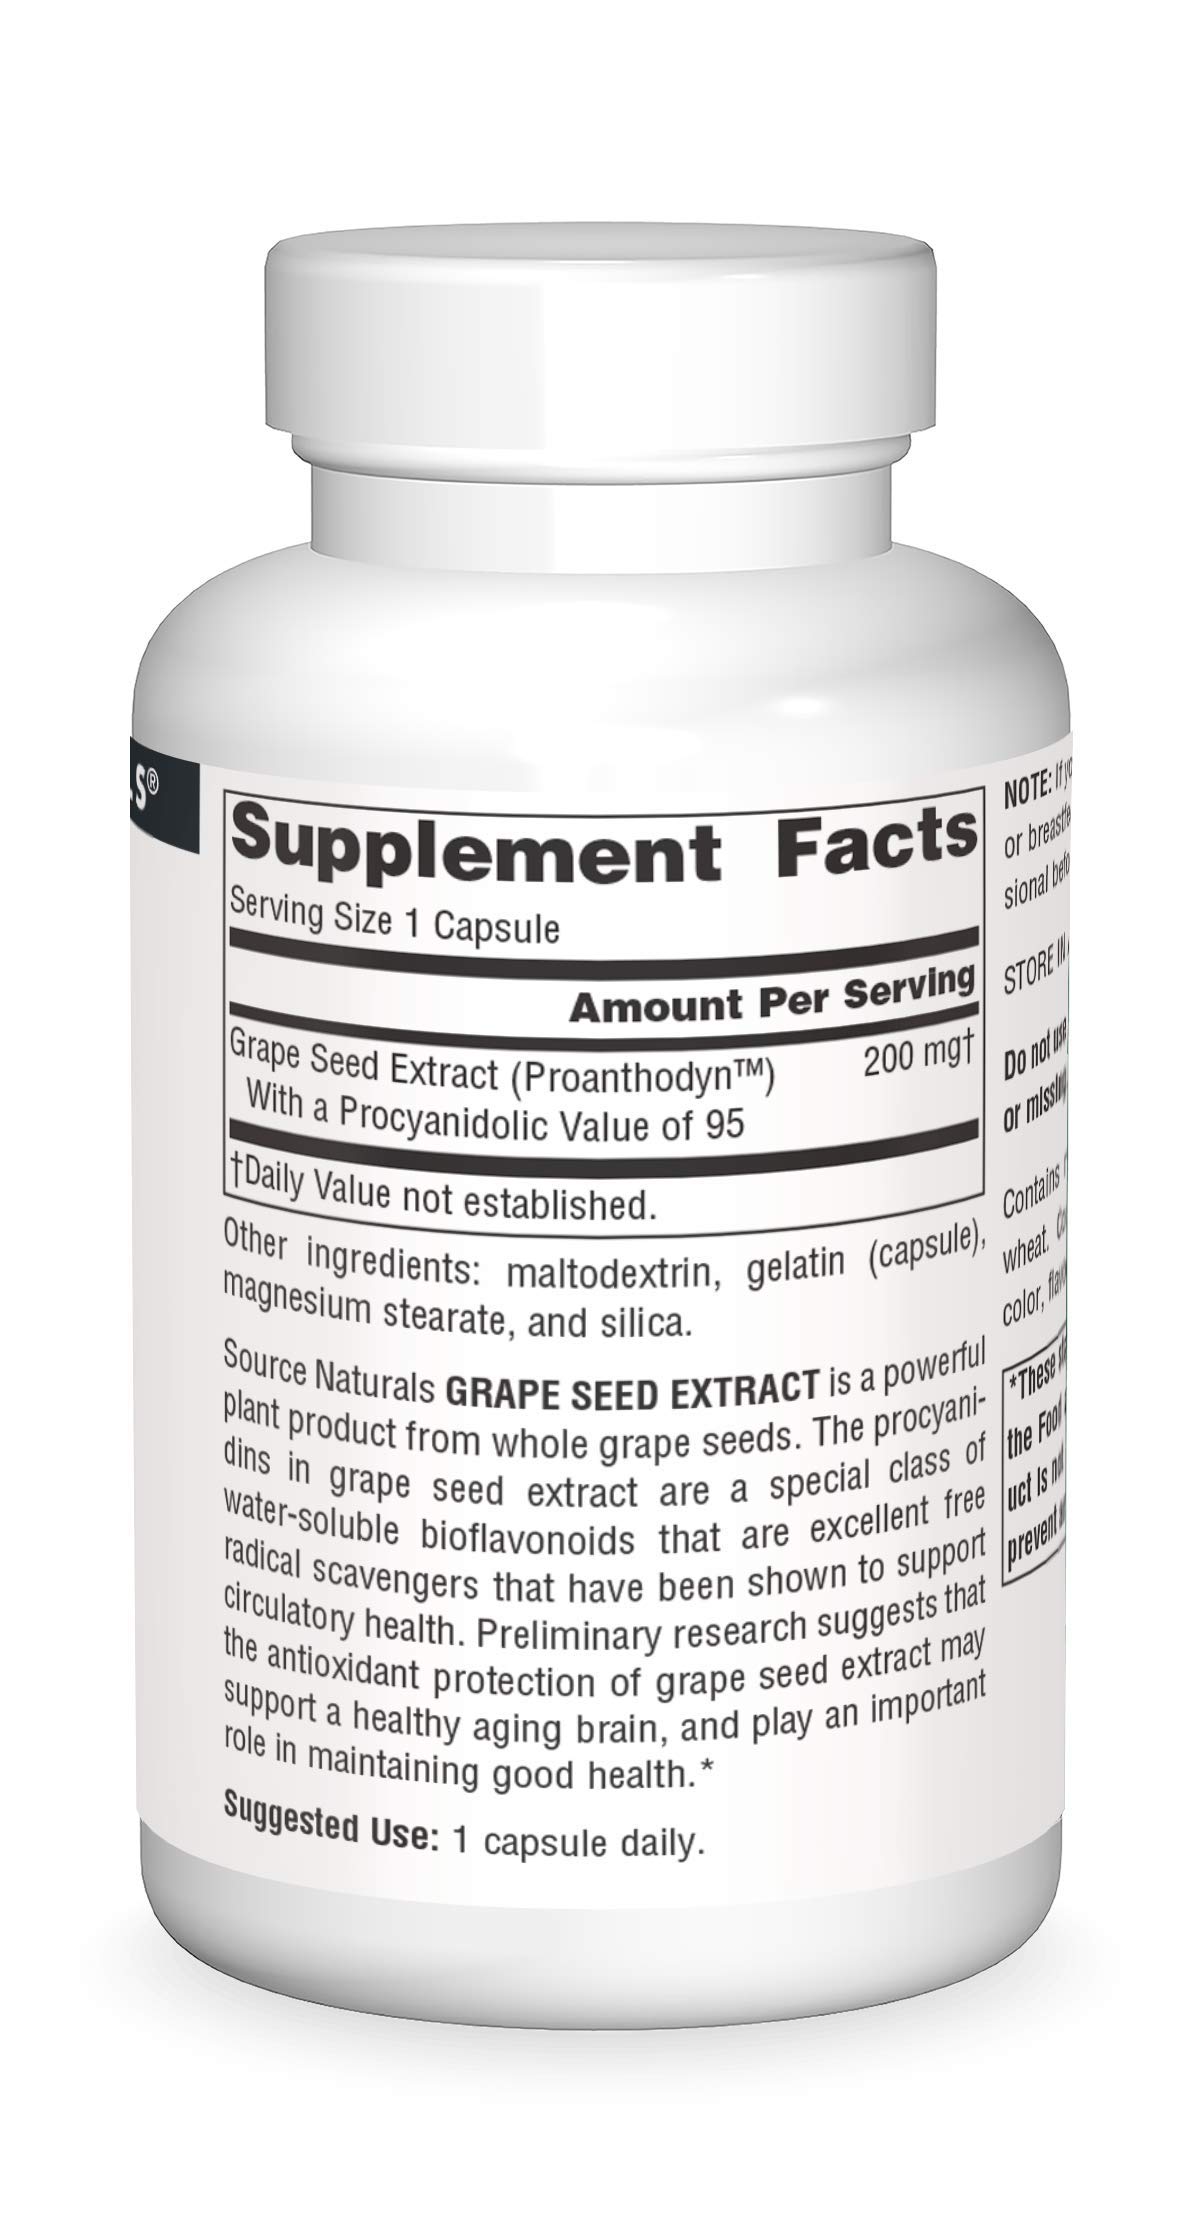 Source Naturals Grape Seed Extract, Proanthodyn 200 mg Antioxidant Protection & Supports Healthy Aging Brain - 90 Capsules